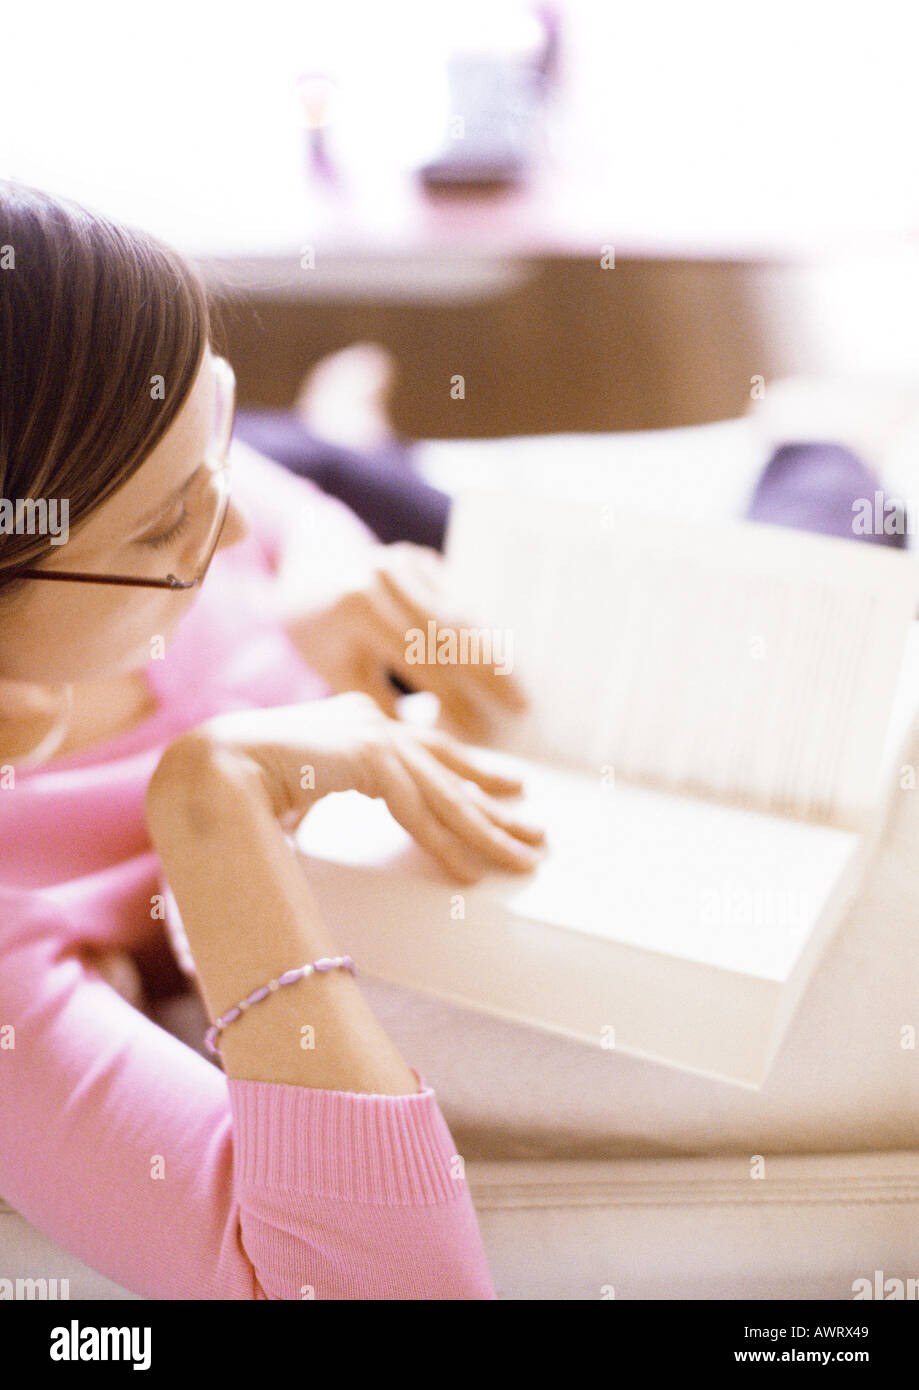 Woman reading book, side view Stock Photo